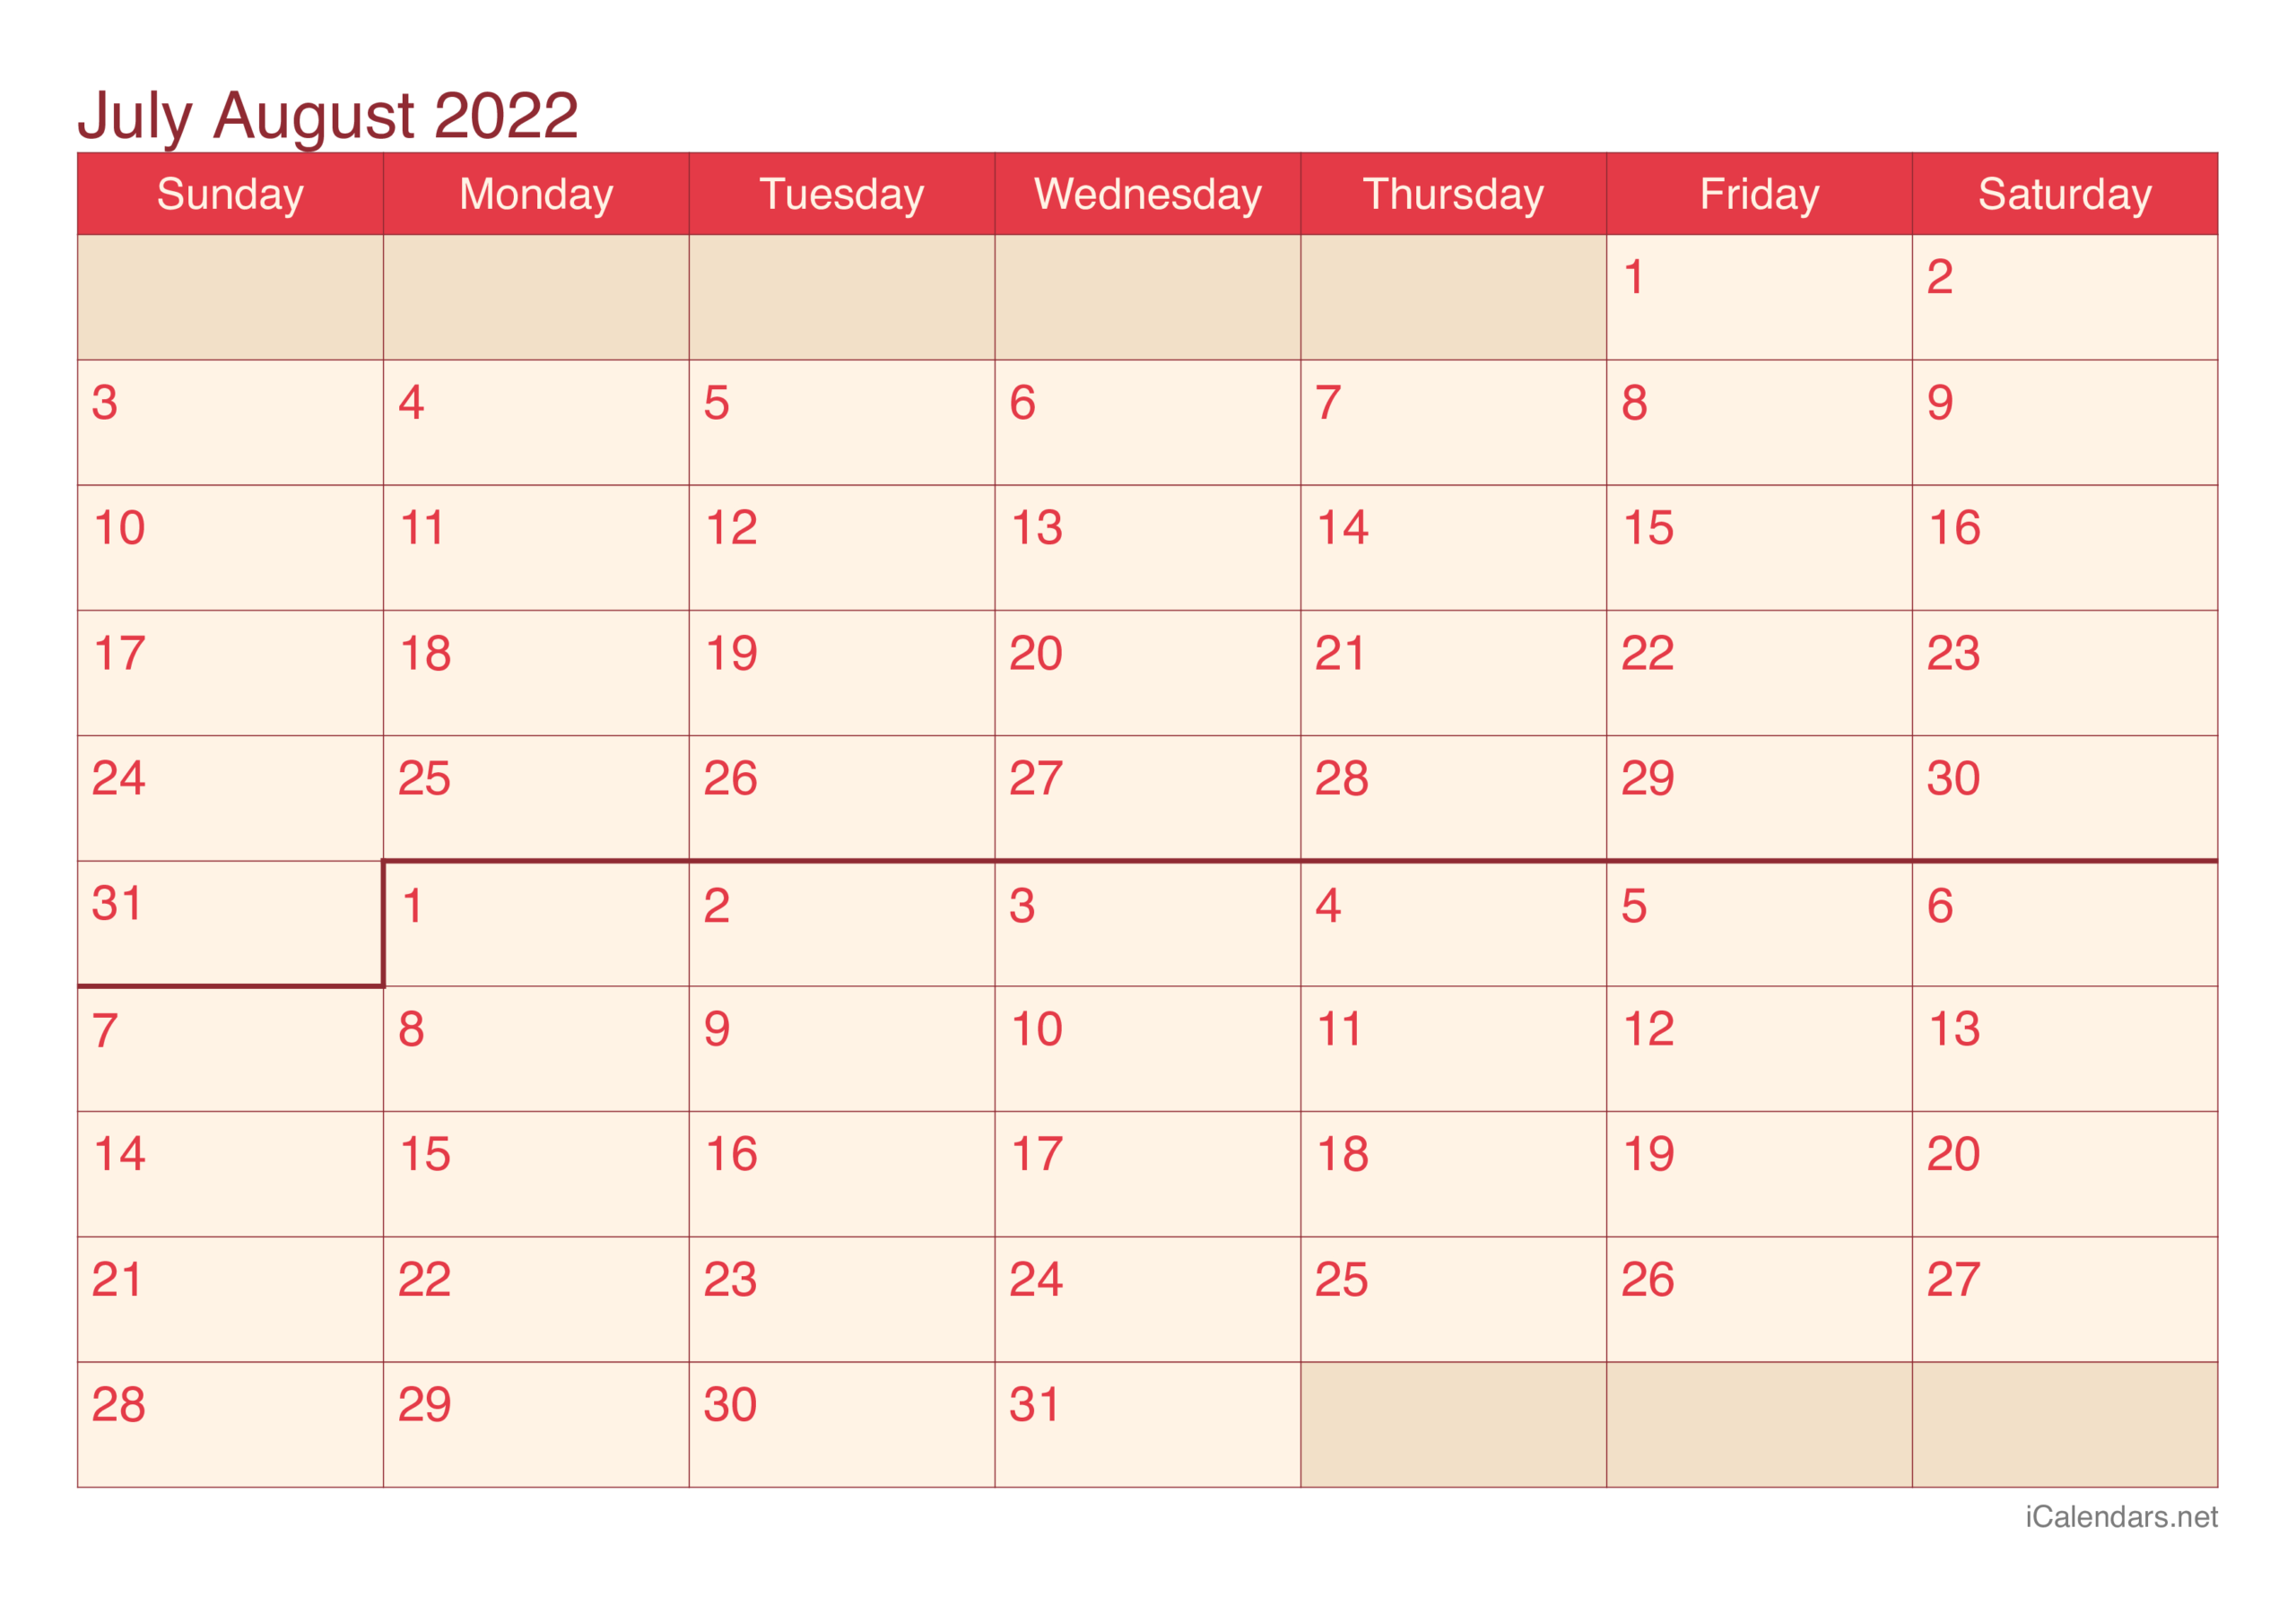 July And August 2022 Printable Calendar - Icalendars